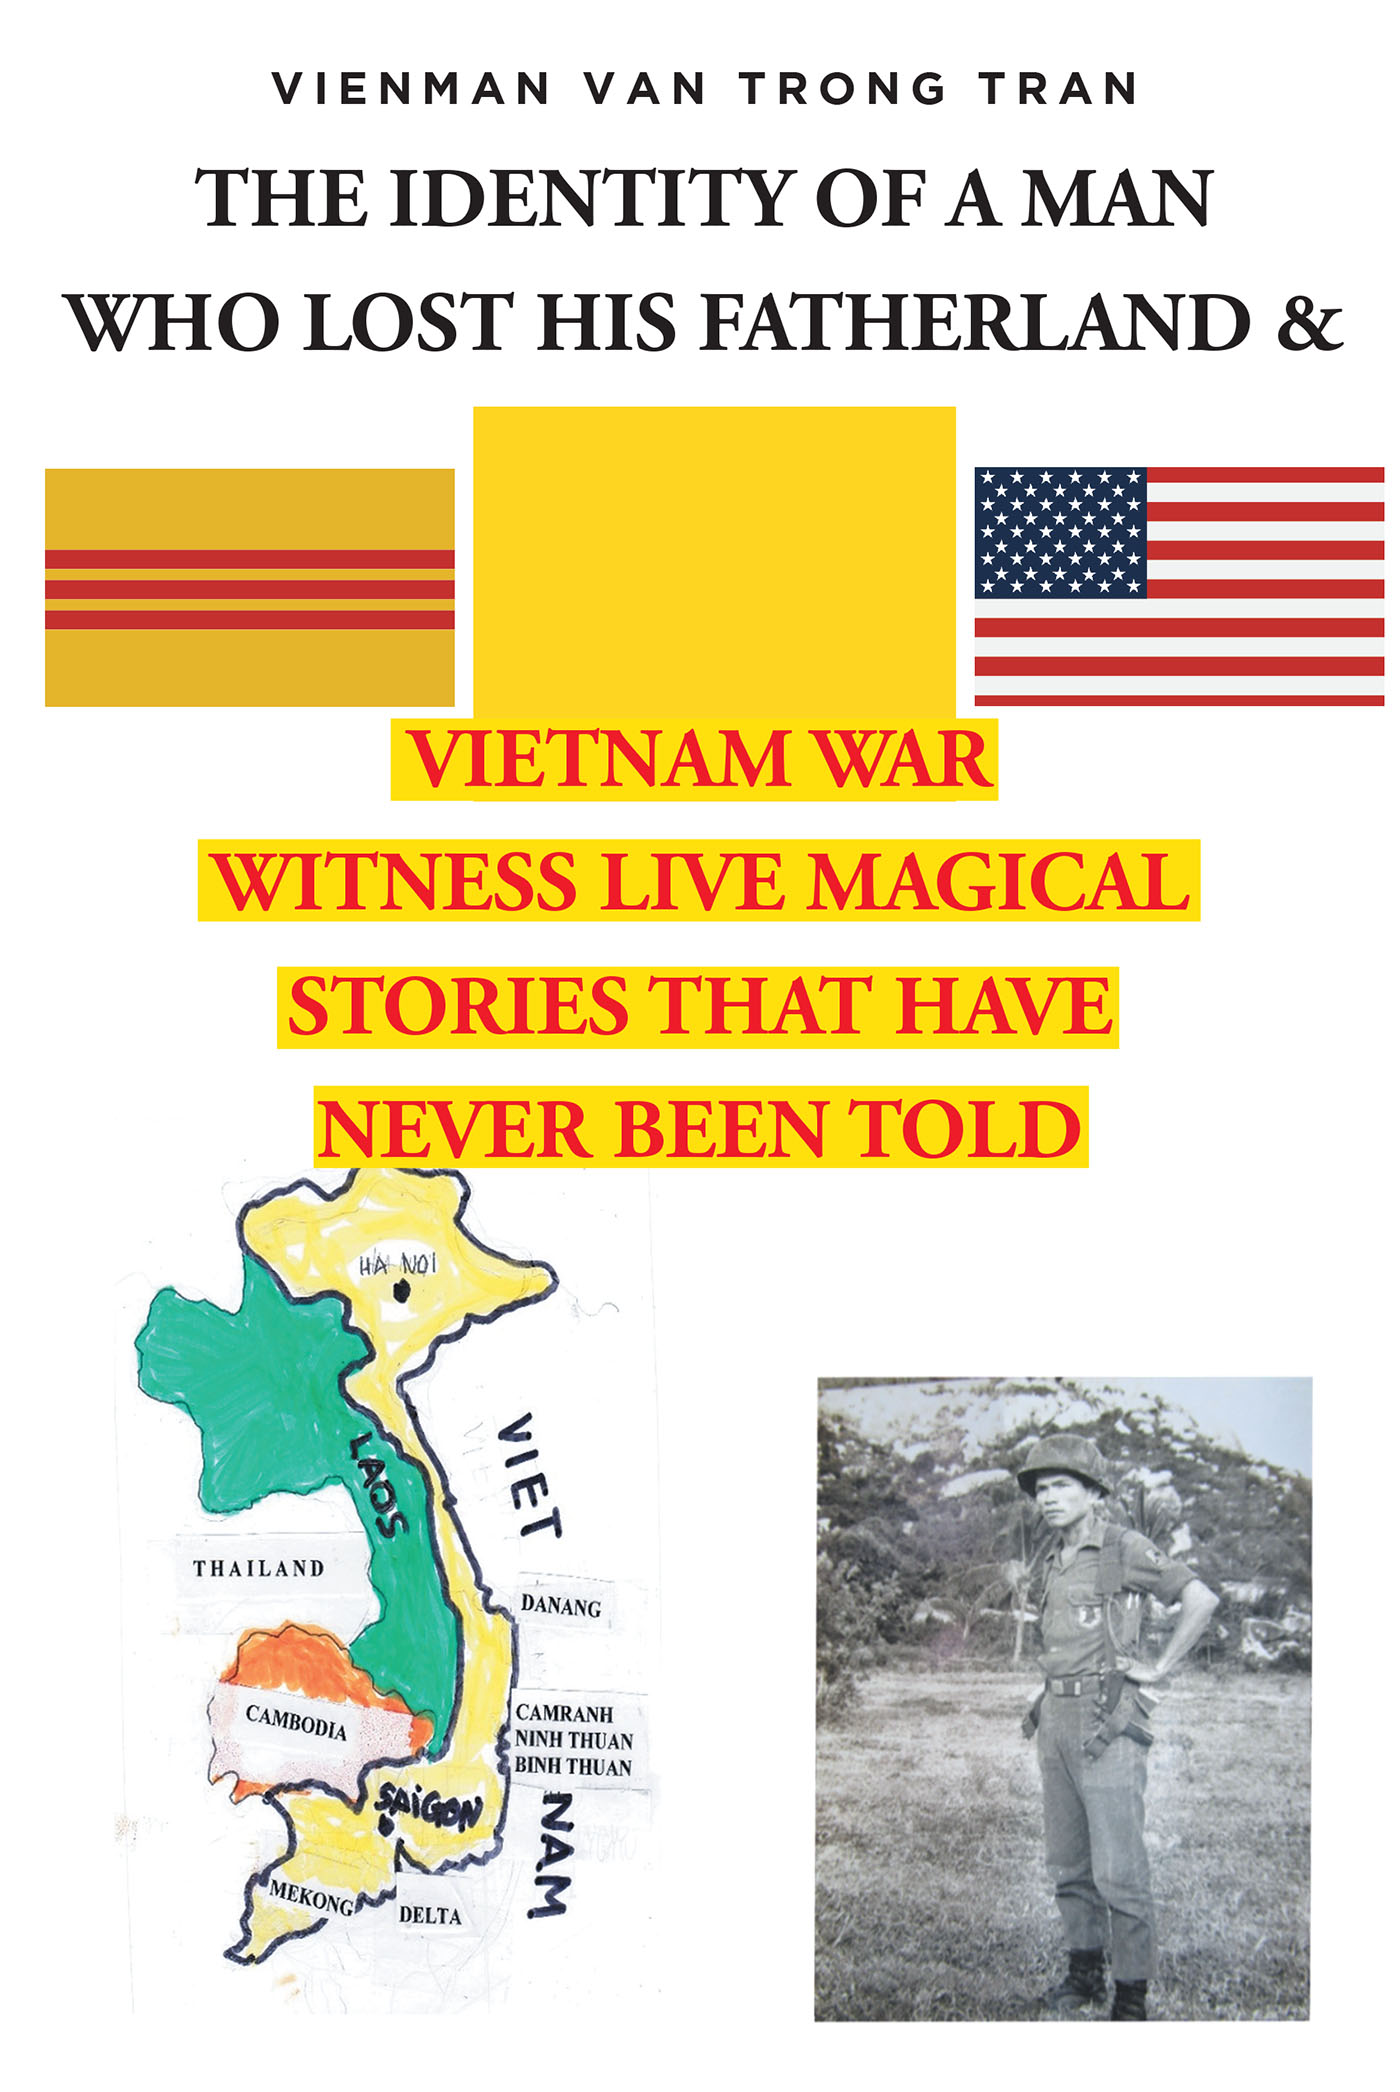 THE IDENTITY OF A MAN  WHO LOST HIS FATHERLAND & VIETNAM WAR Cover Image